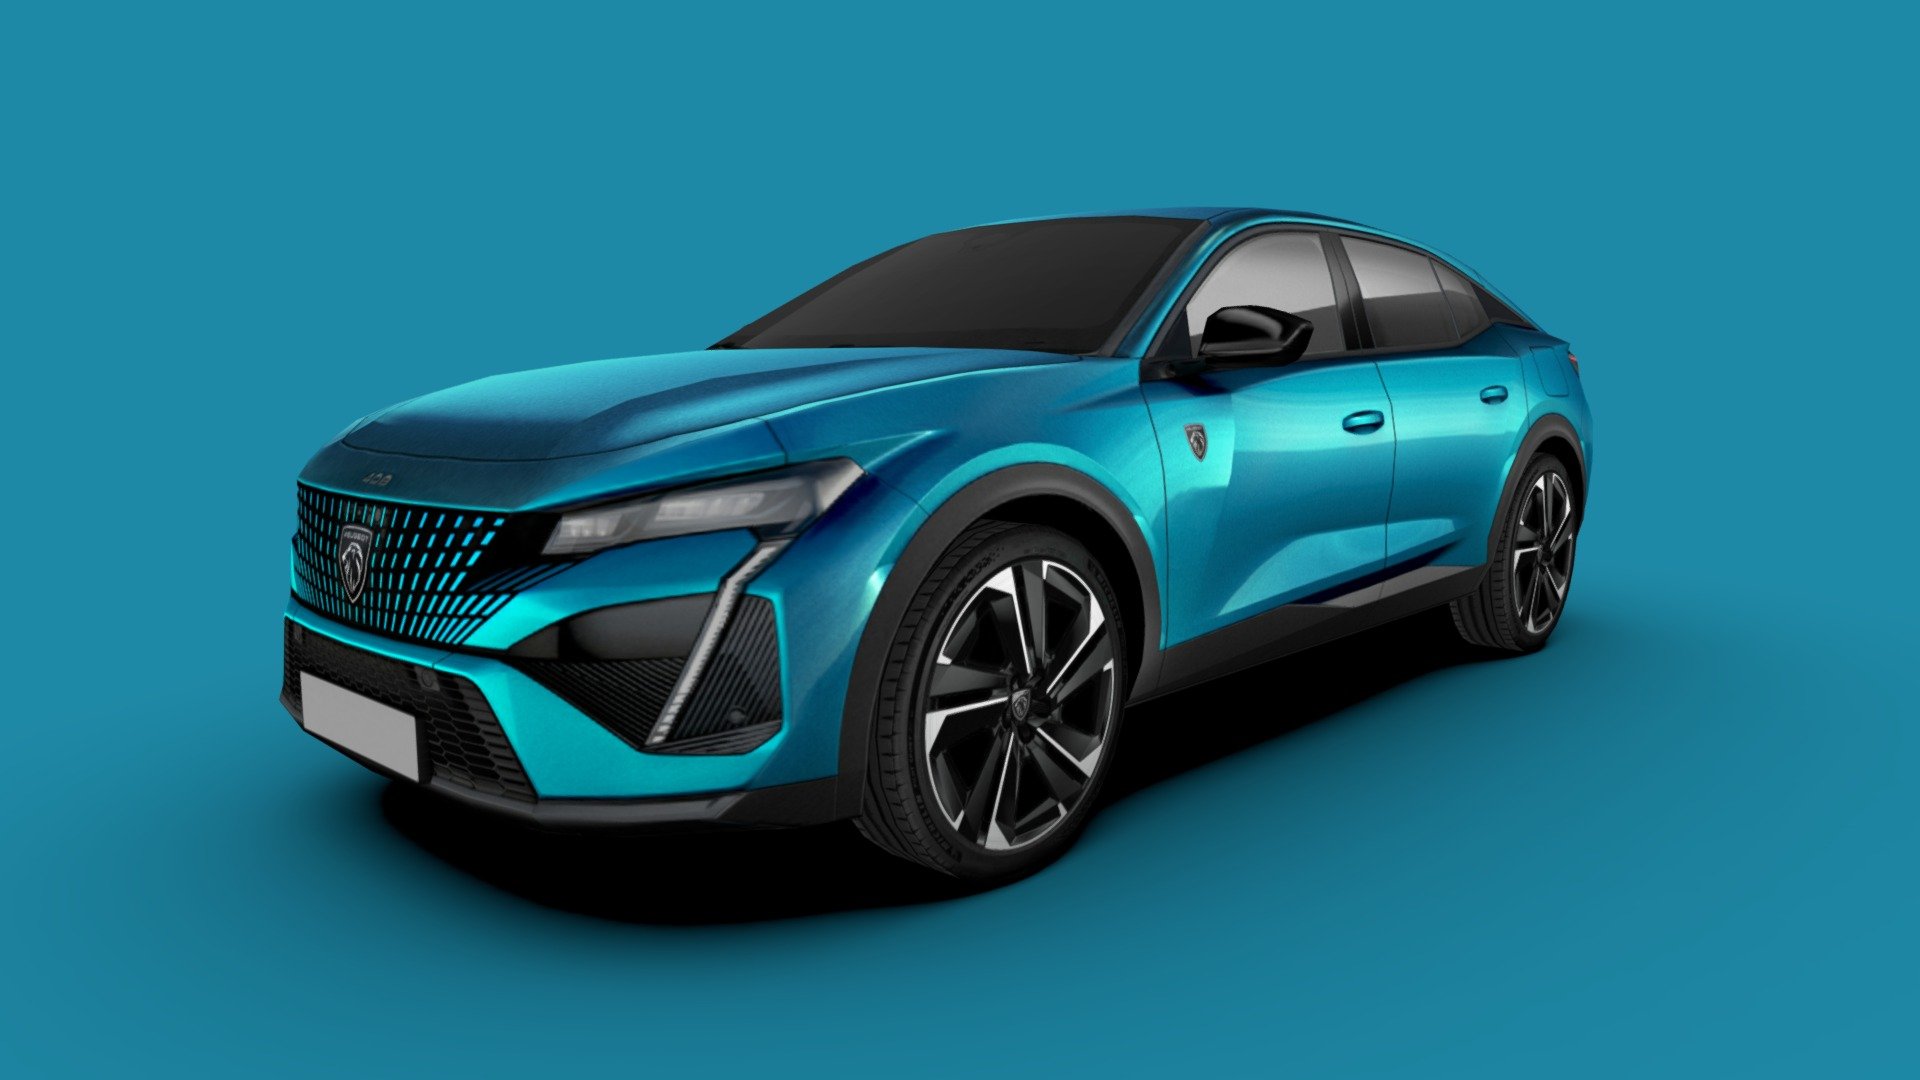 3d model of the 2023 Peugeot 408, a compact crossover SUV, 5-door liftback car.

The model is very low-poly, full-scale, real photos texture (single 2048 x 2048 png).

Package includes 5 file formats and texture (3ds, fbx, dae, obj and skp)

Hope you enjoy it.

José Bronze - Peugeot 408 2023 - Buy Royalty Free 3D model by Jose Bronze (@pinceladas3d) 3d model